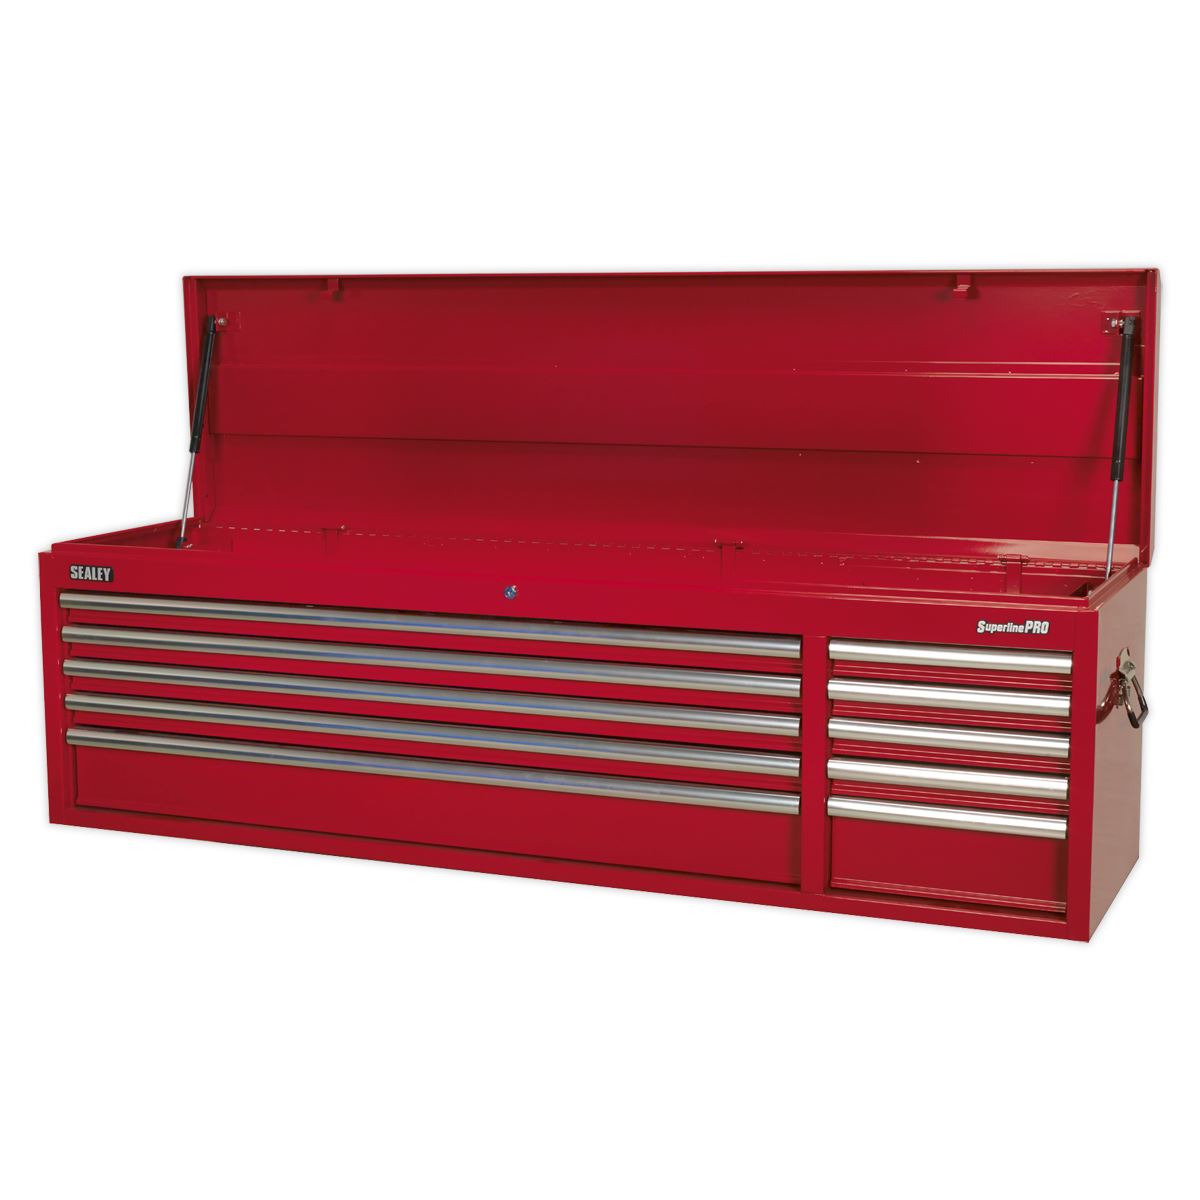 Sealey Superline Pro Topchest 10 Drawer with Ball-Bearing Slides Heavy-Duty - Red